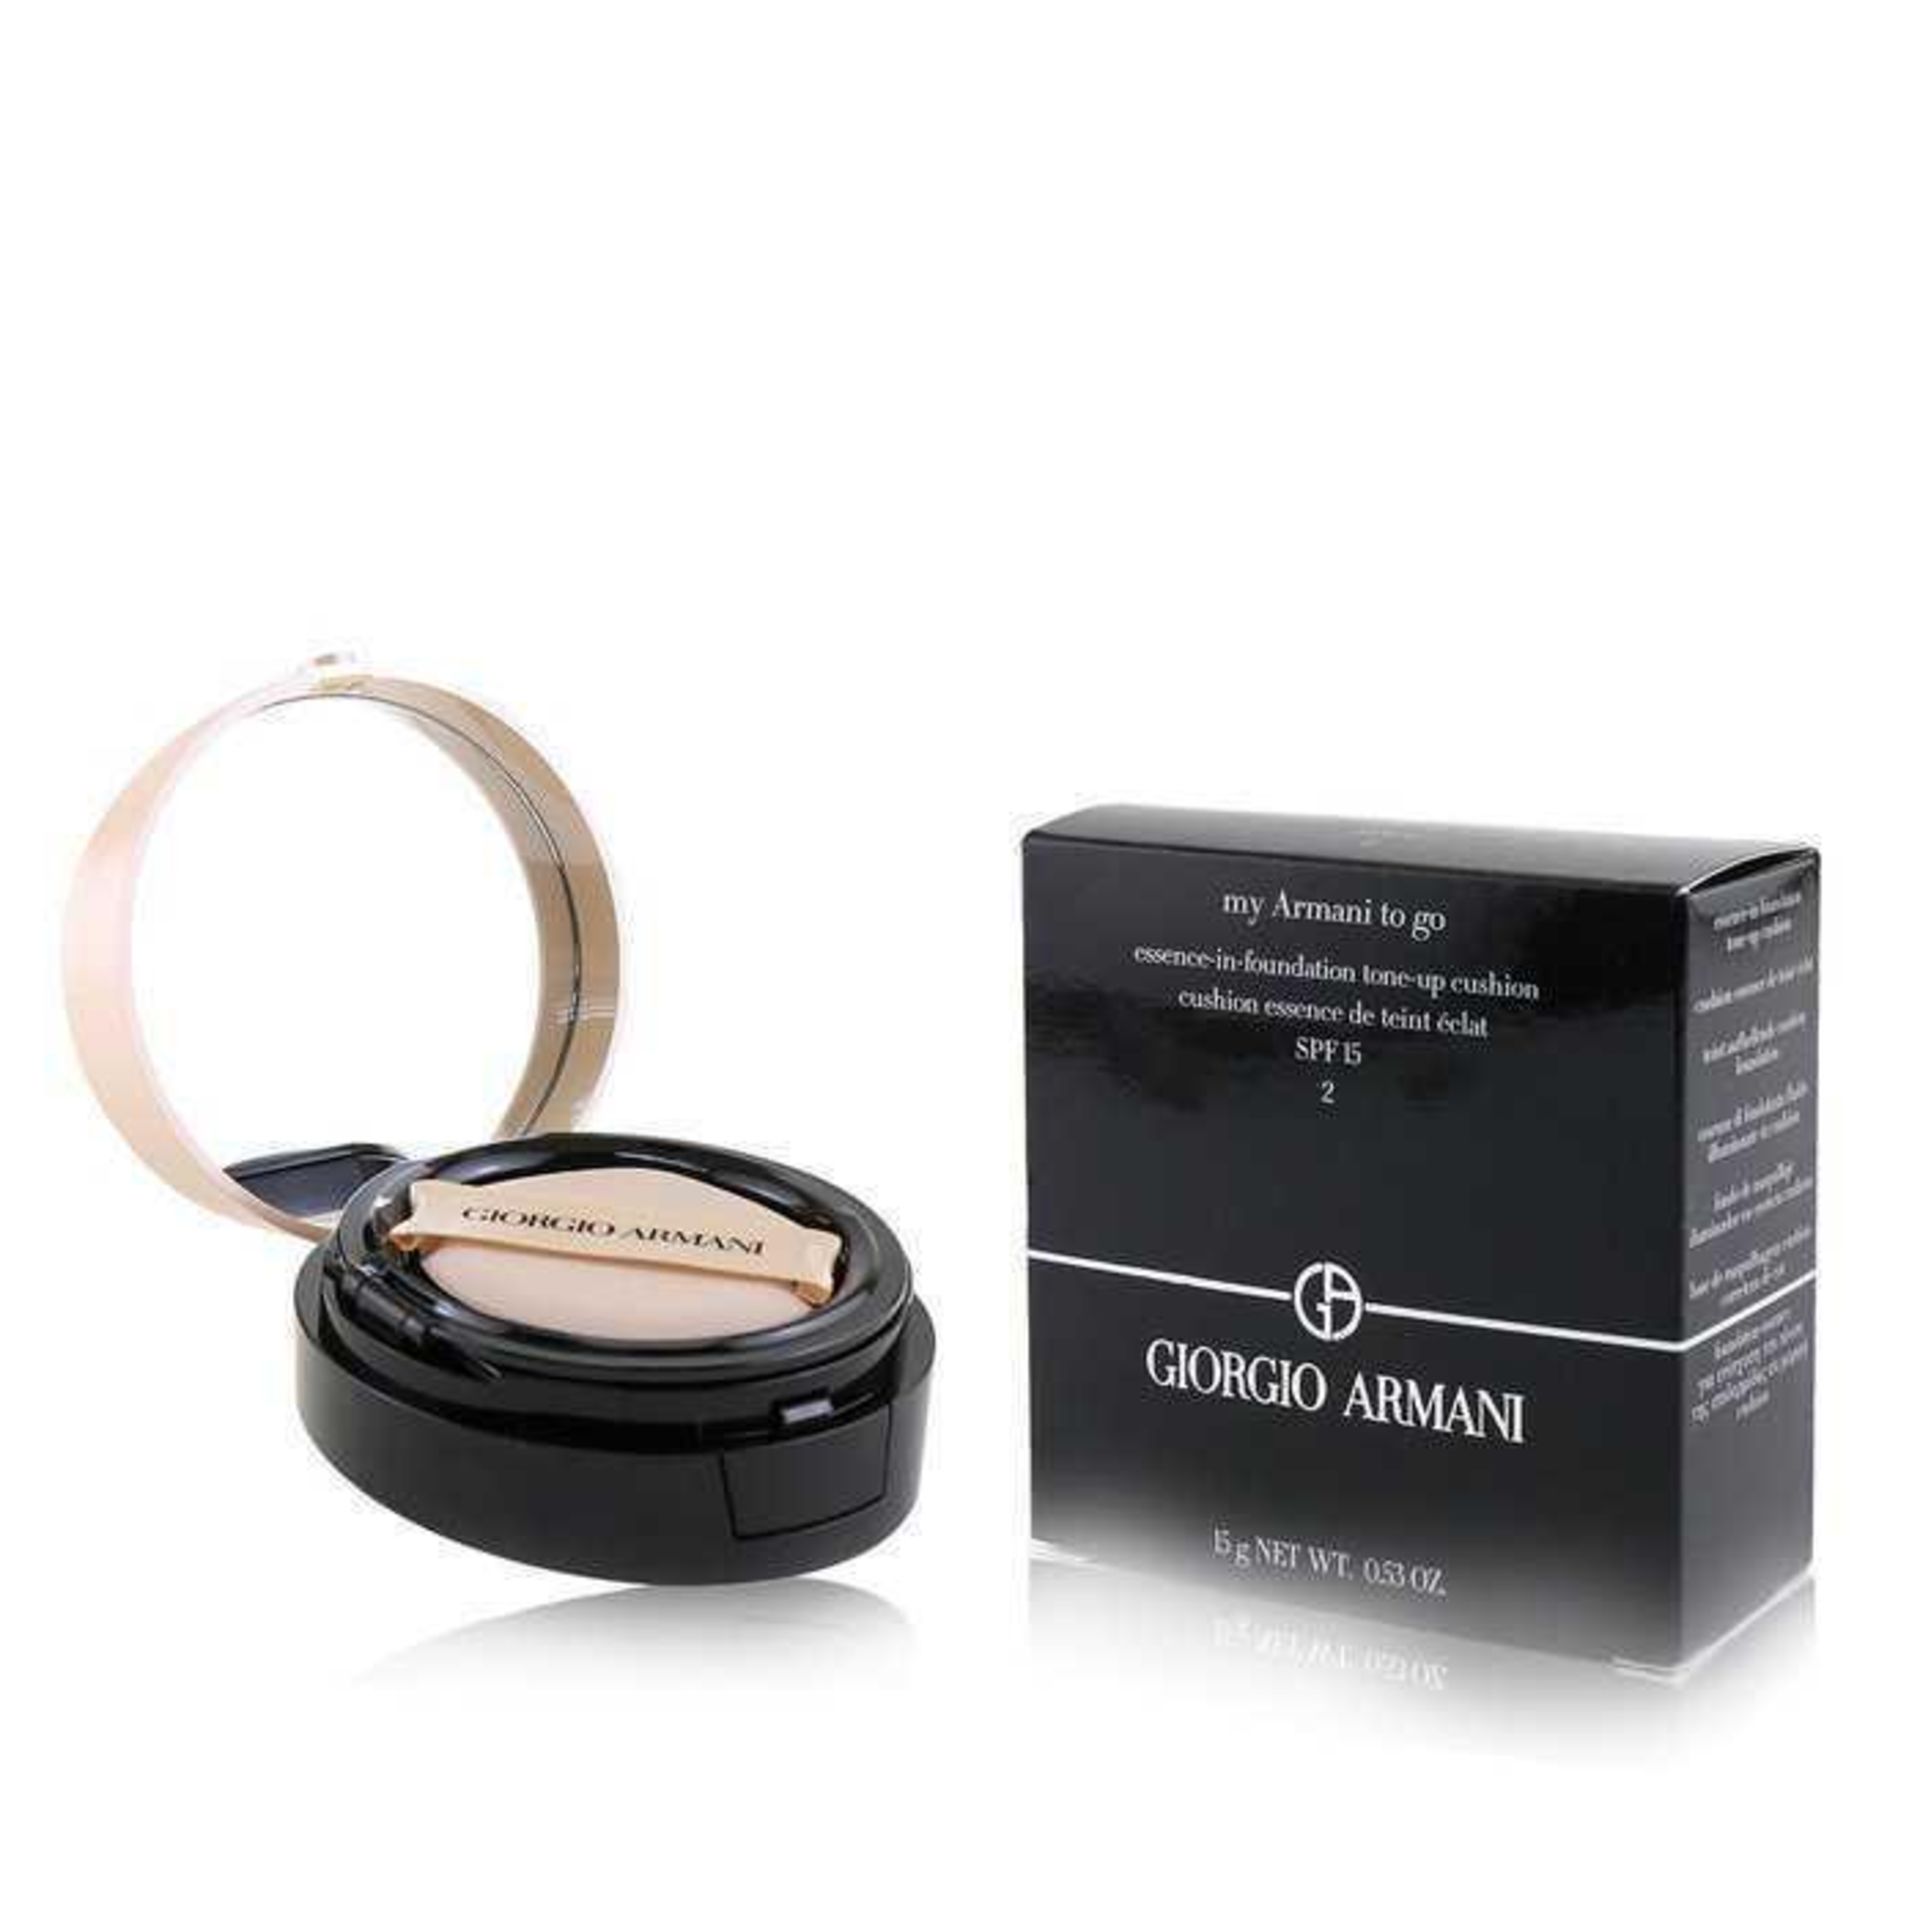 Rrp £200 Lot To Contain 3 Boxed Giorgio Armani Essence-In-Foundation With Touch Up Cushion Spf15